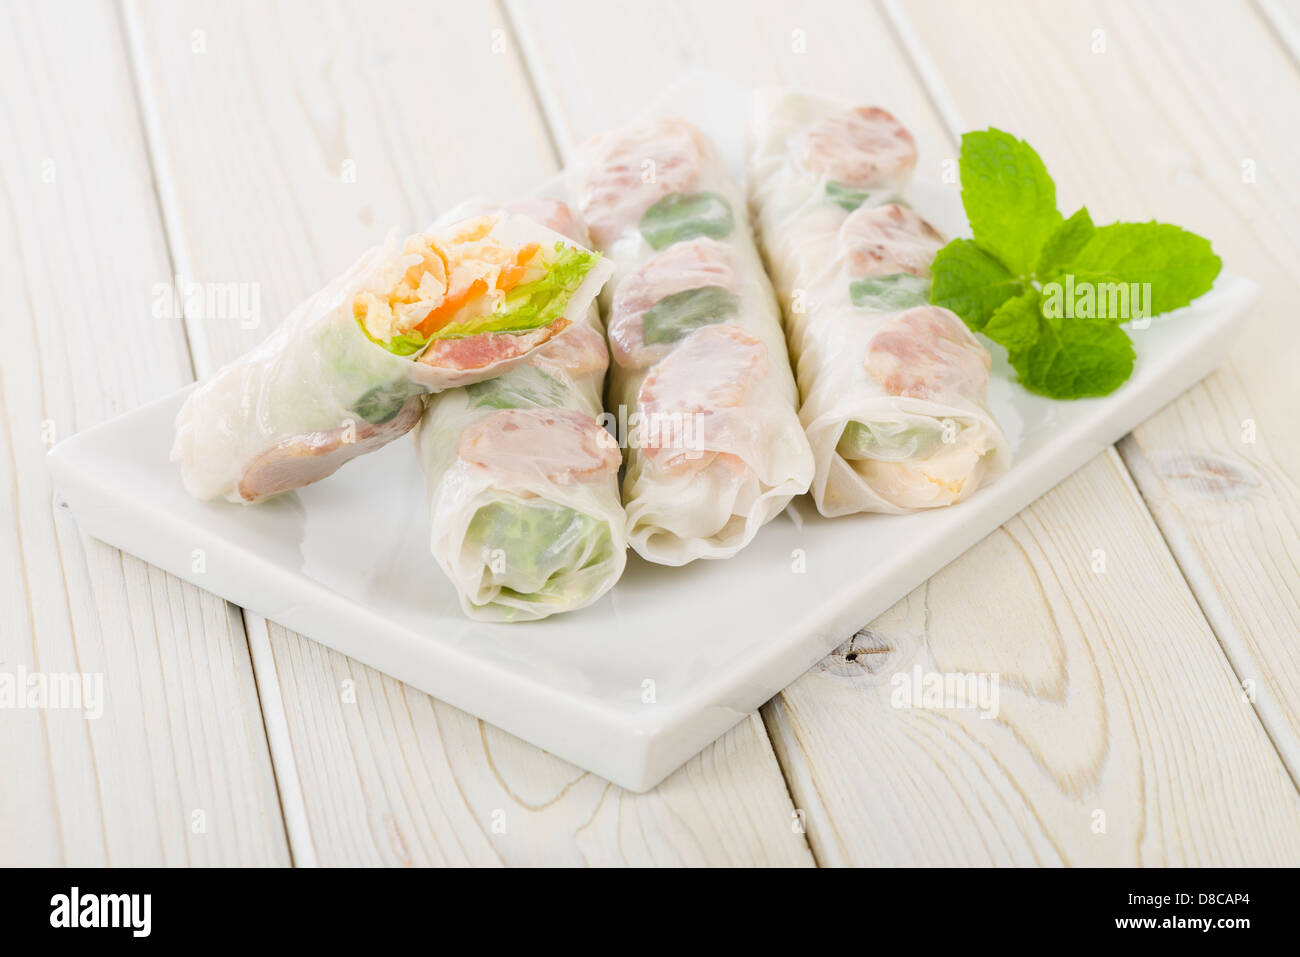 Bo Bia - Vietnamese fresh summer rolls with Chinese sausage, jicama, carrots, lettuce, egg and dried shrimp. Stock Photo